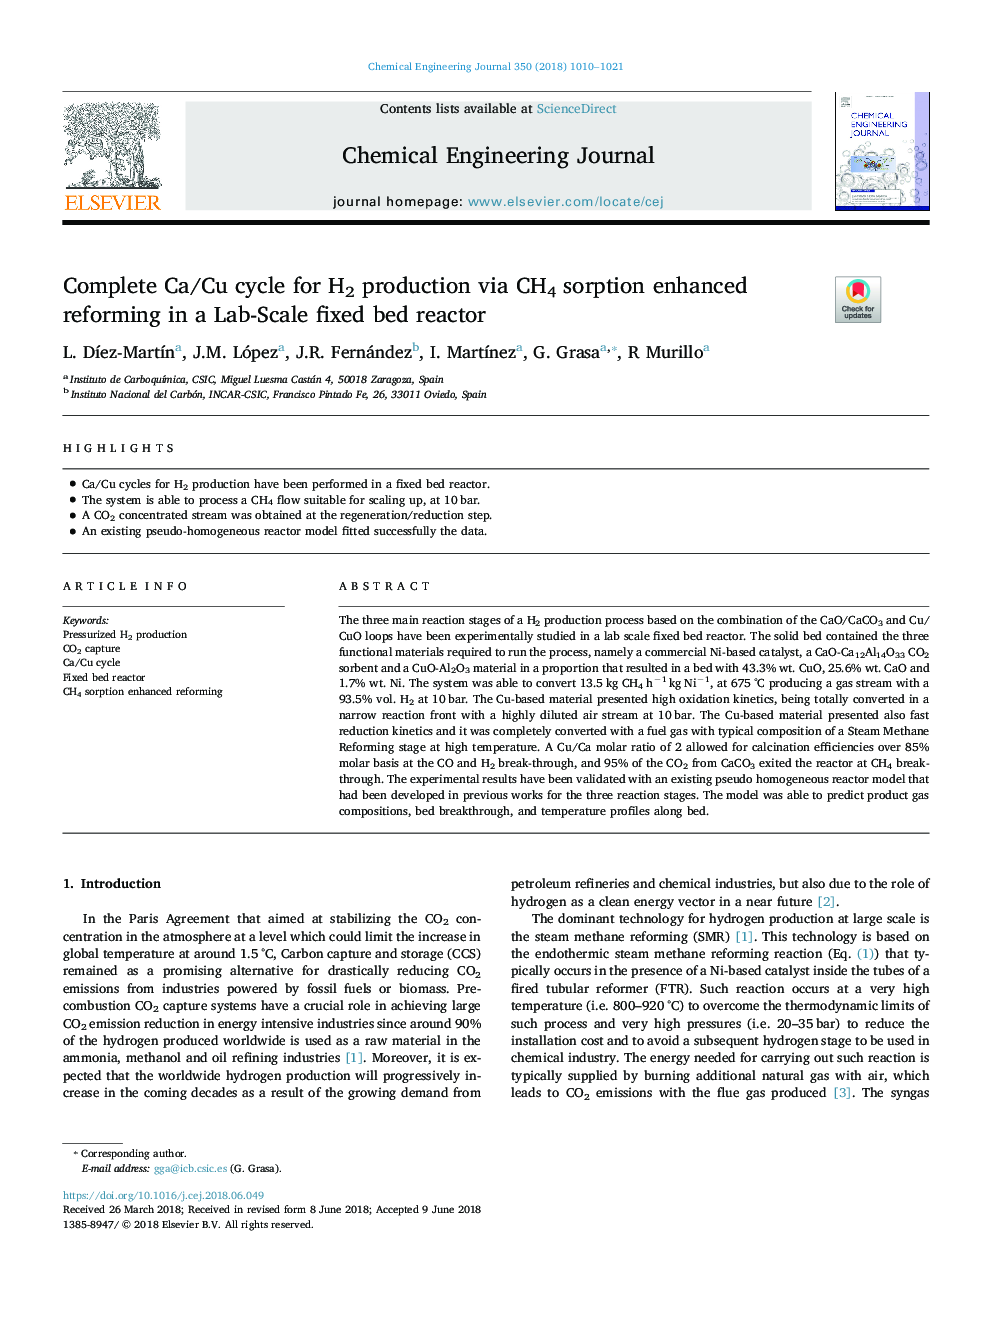 Complete Ca/Cu cycle for H2 production via CH4 sorption enhanced reforming in a Lab-Scale fixed bed reactor